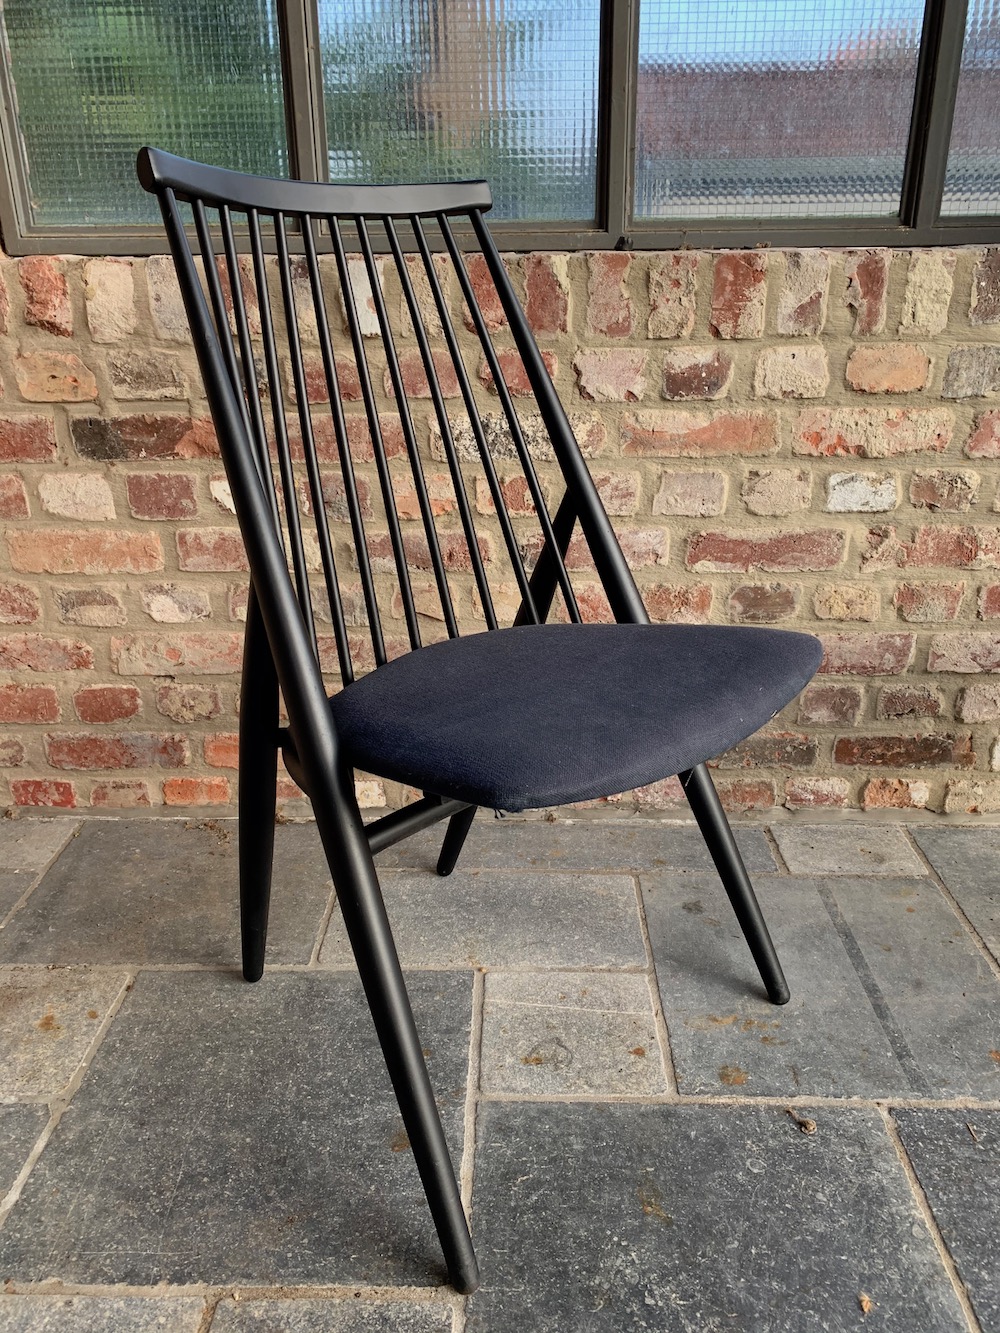 vintage dining chair, spine chair, spine chairs, chaise vintage, chaise à barreaux, scandinavian chair, wooden chair, black chairs, midcentury modern, vintage furniture, kitchen chairs, dining, home, charming chairs, nordic chairs, fabulous chairs, chairs with character, chic chairs, dining room chairs, set of chairs, série de chaises